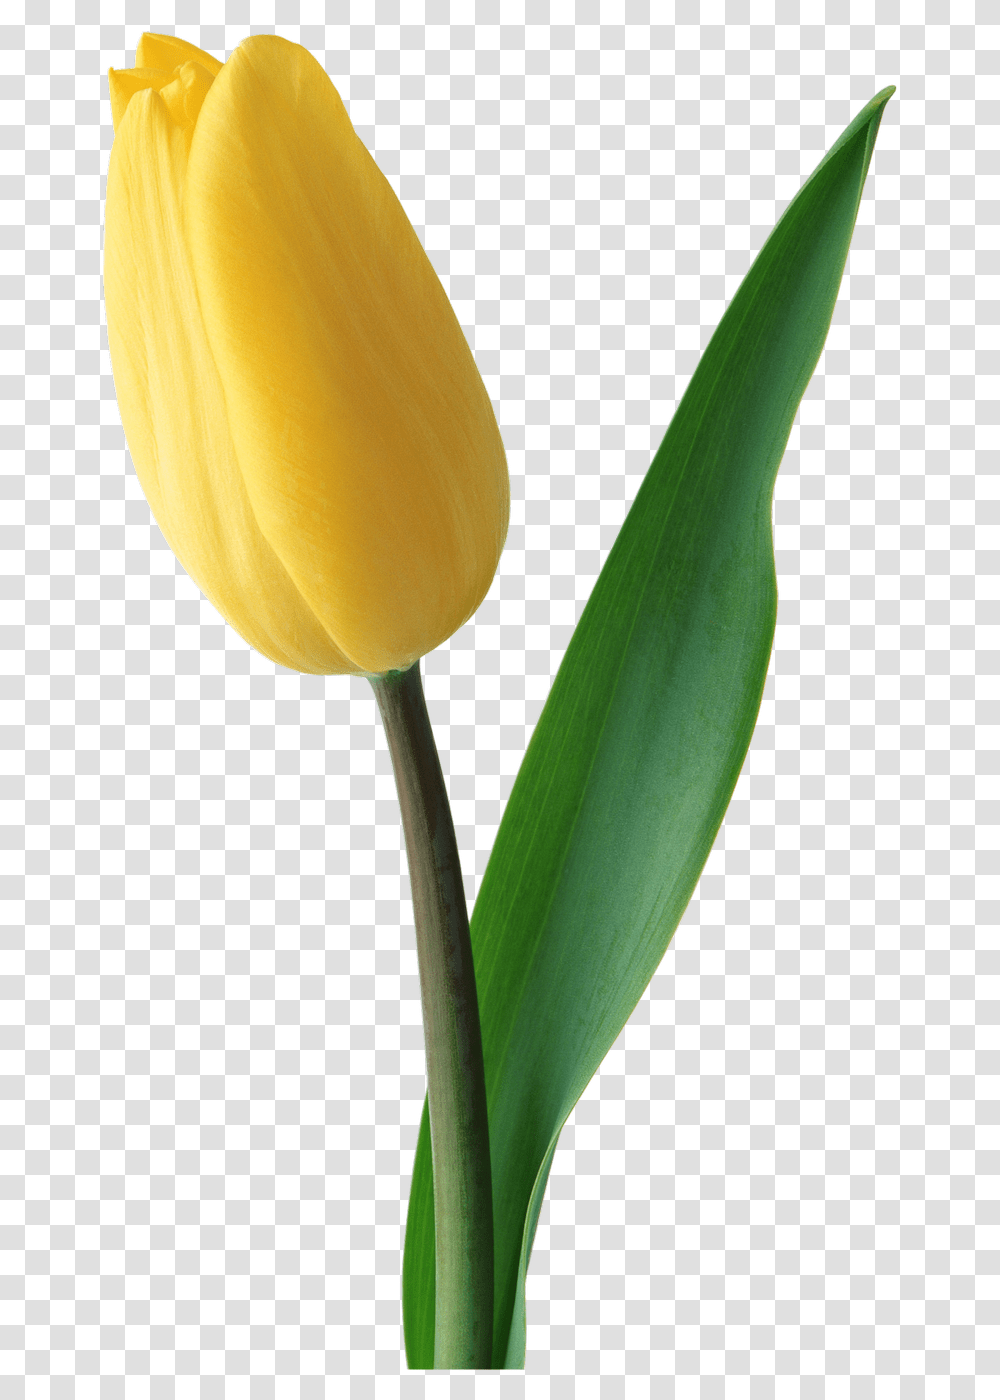 Download Tulip Image For Free Yellow Tulip, Plant, Flower, Blossom, Petal Transparent Png